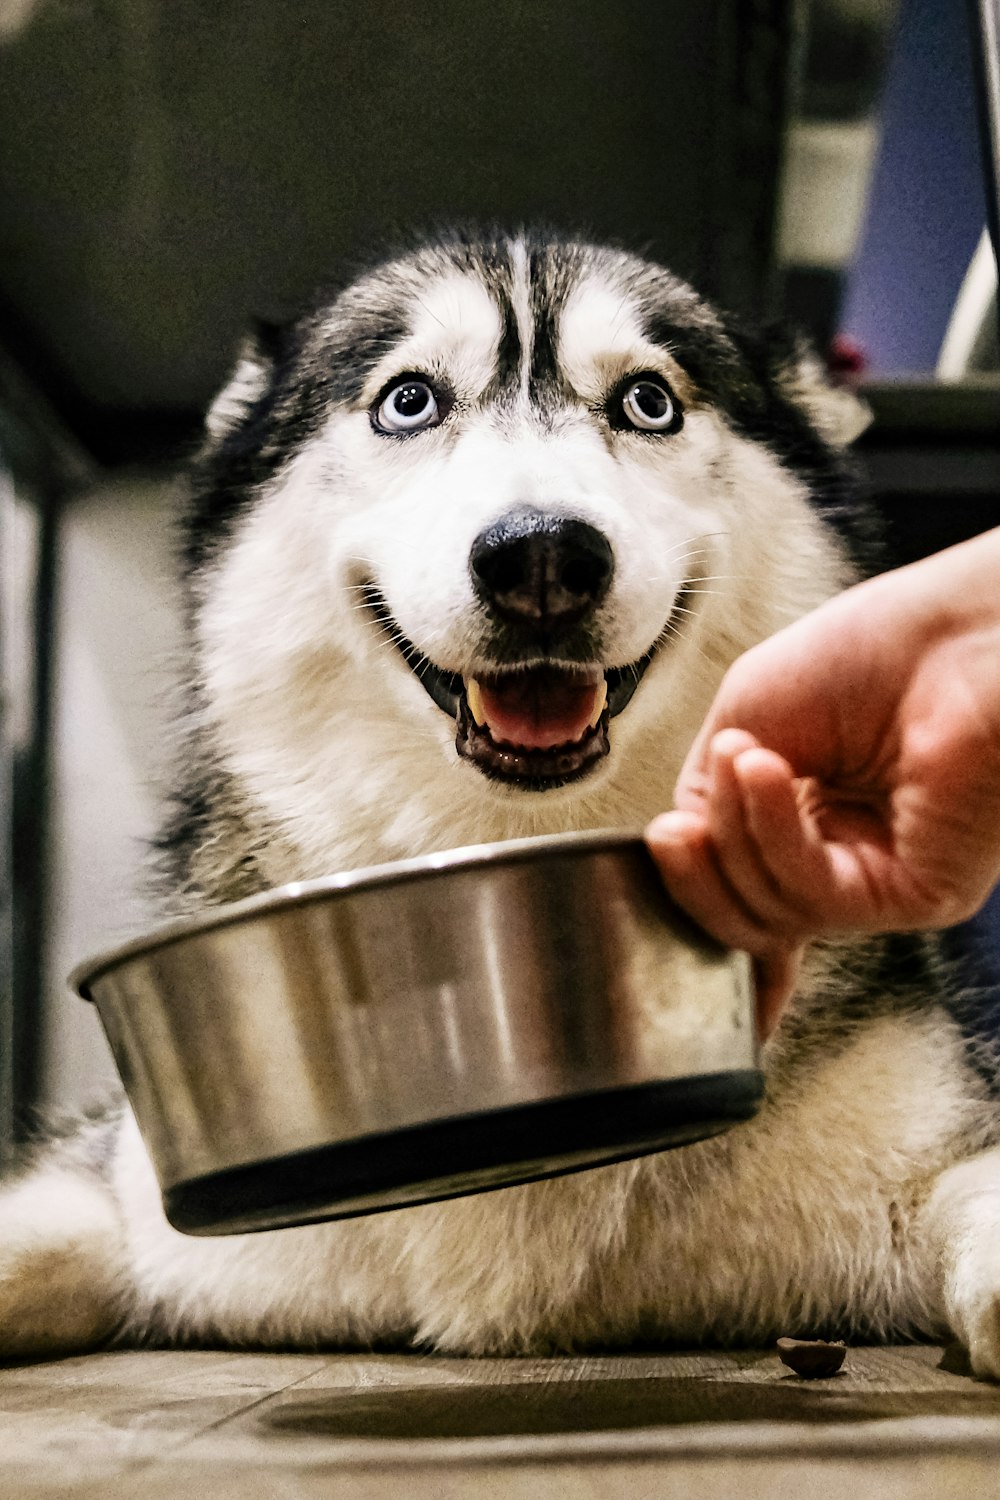 a husky dog eating out of a metal bowl